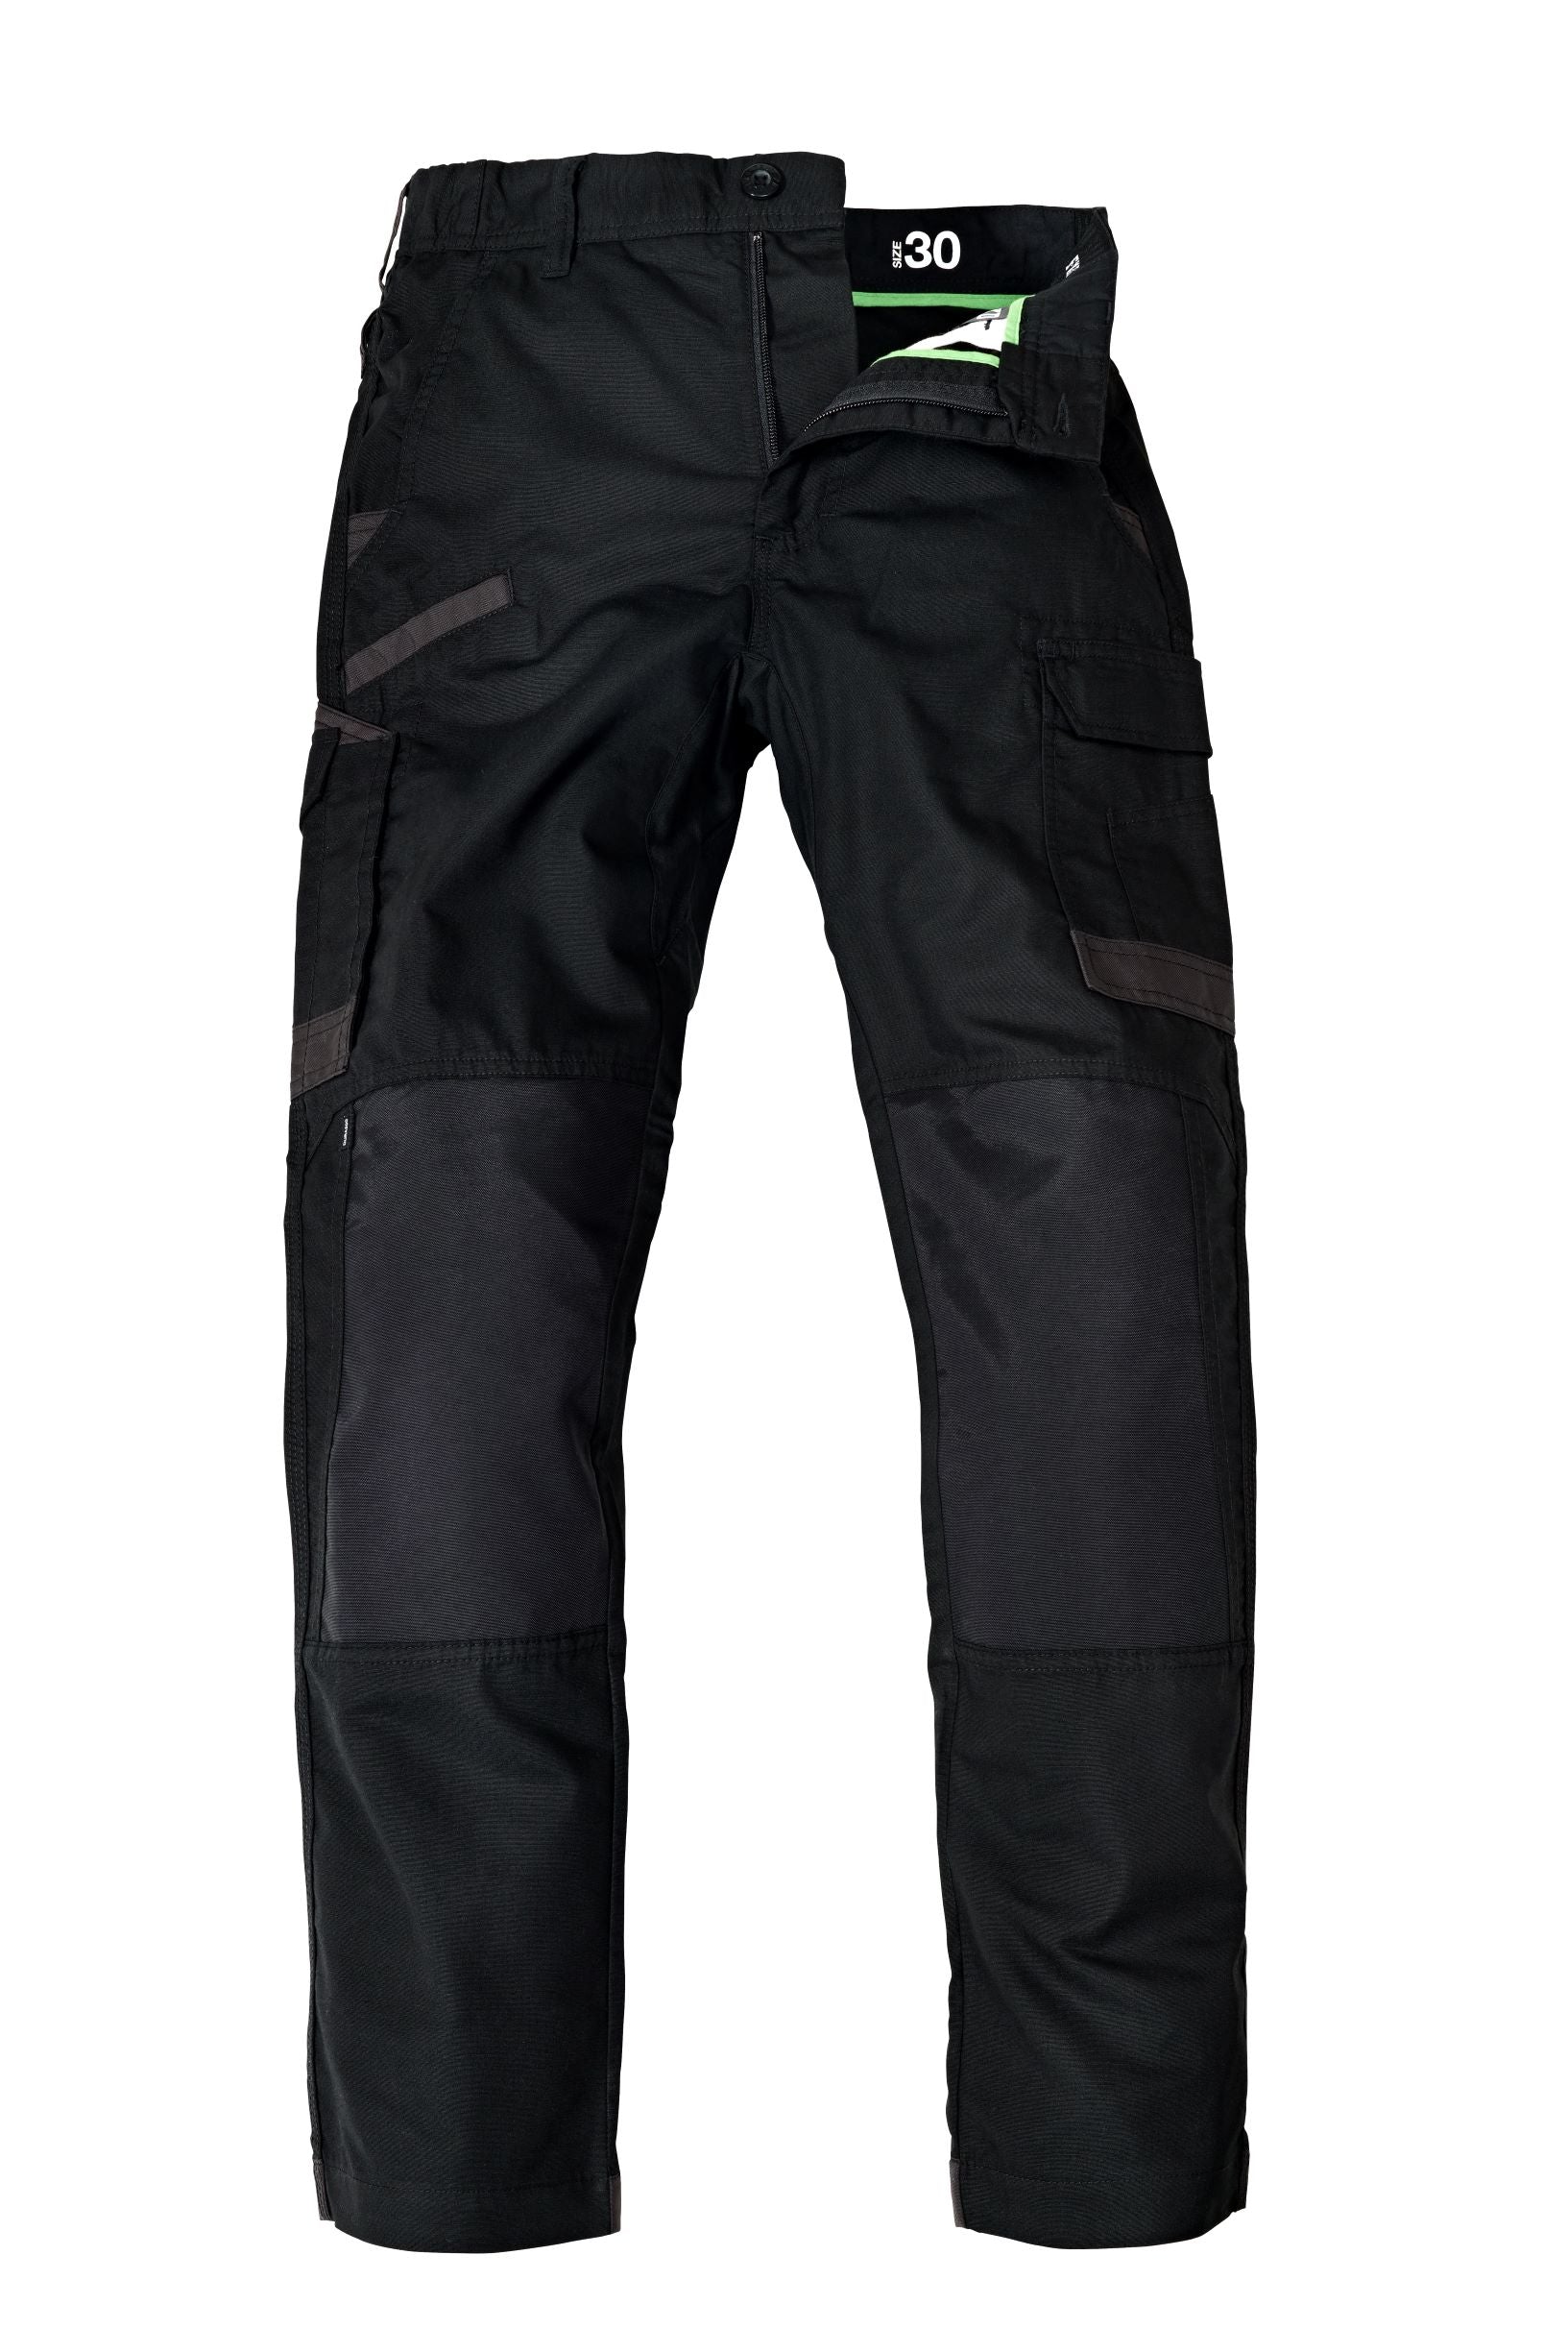 FXD - WP5 - Lightweight Stretch Pants